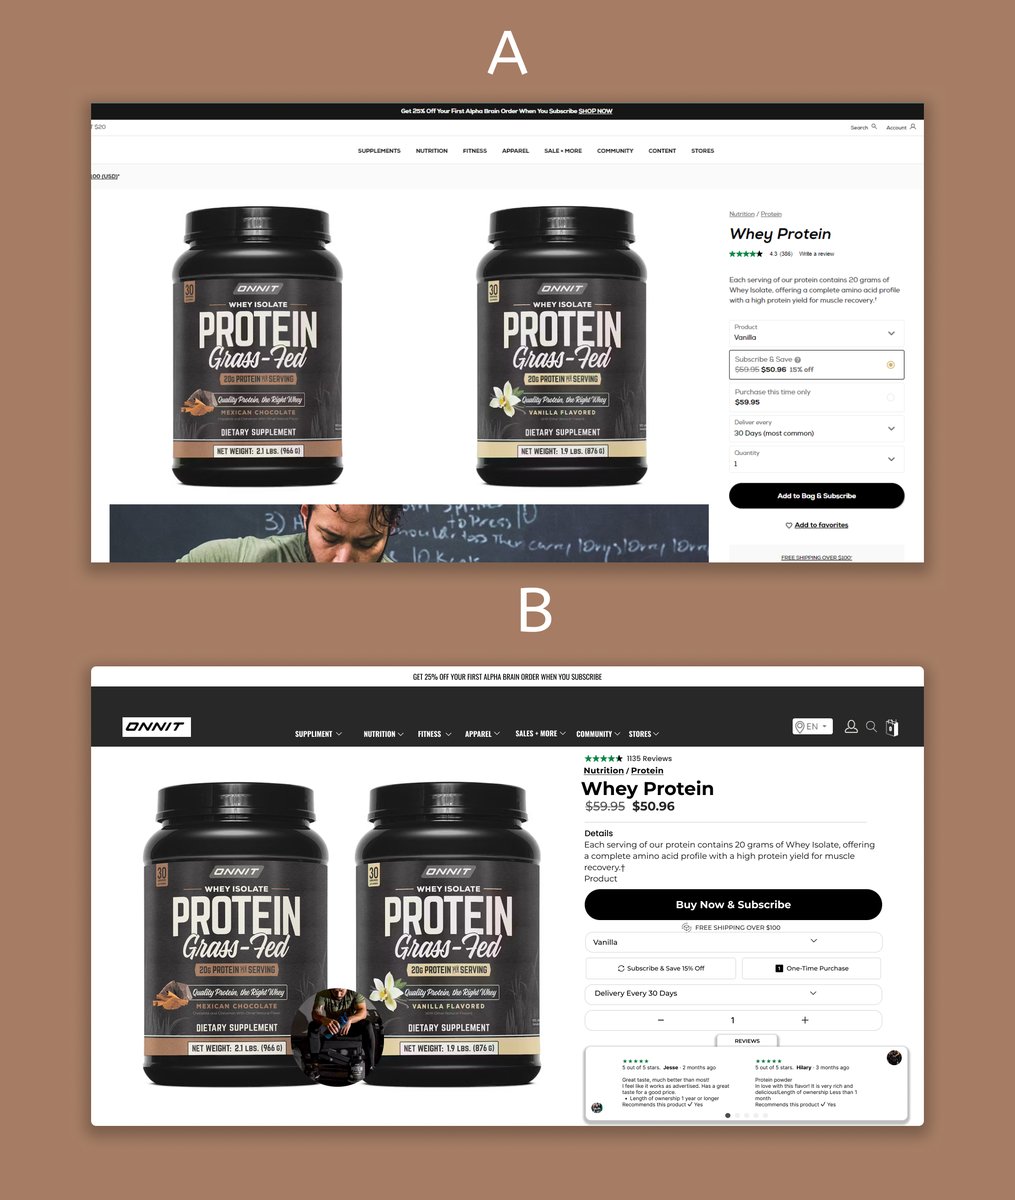 Redesign for ONNIT

Which gets more sales - A or B?